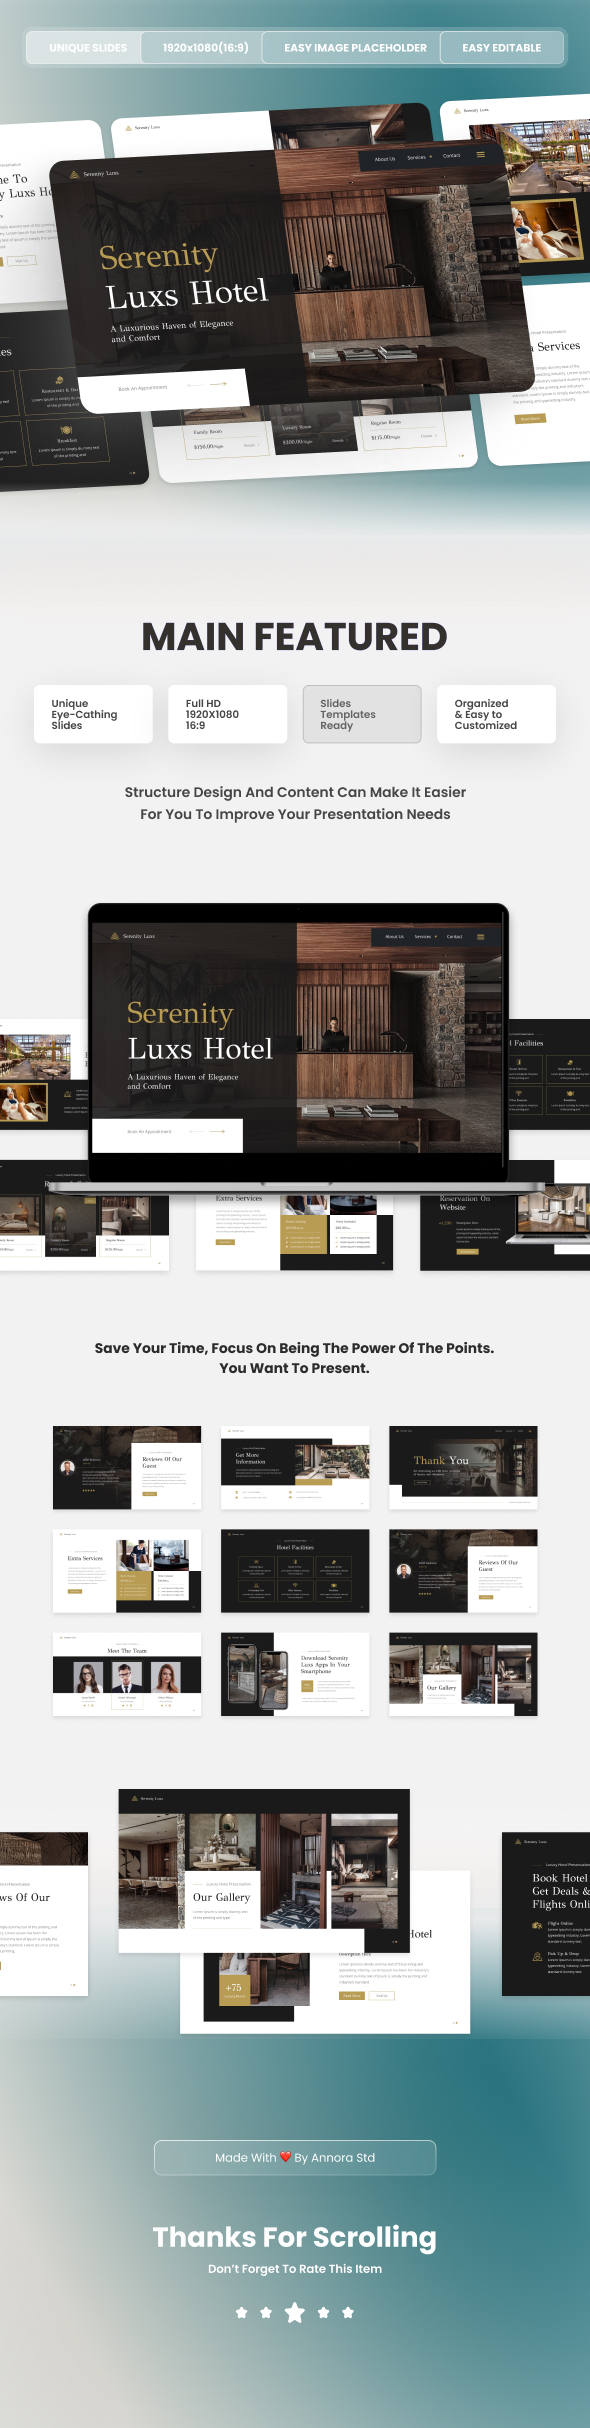 [DOWNLOAD]Serenity Luxs Hotel PowerPoint